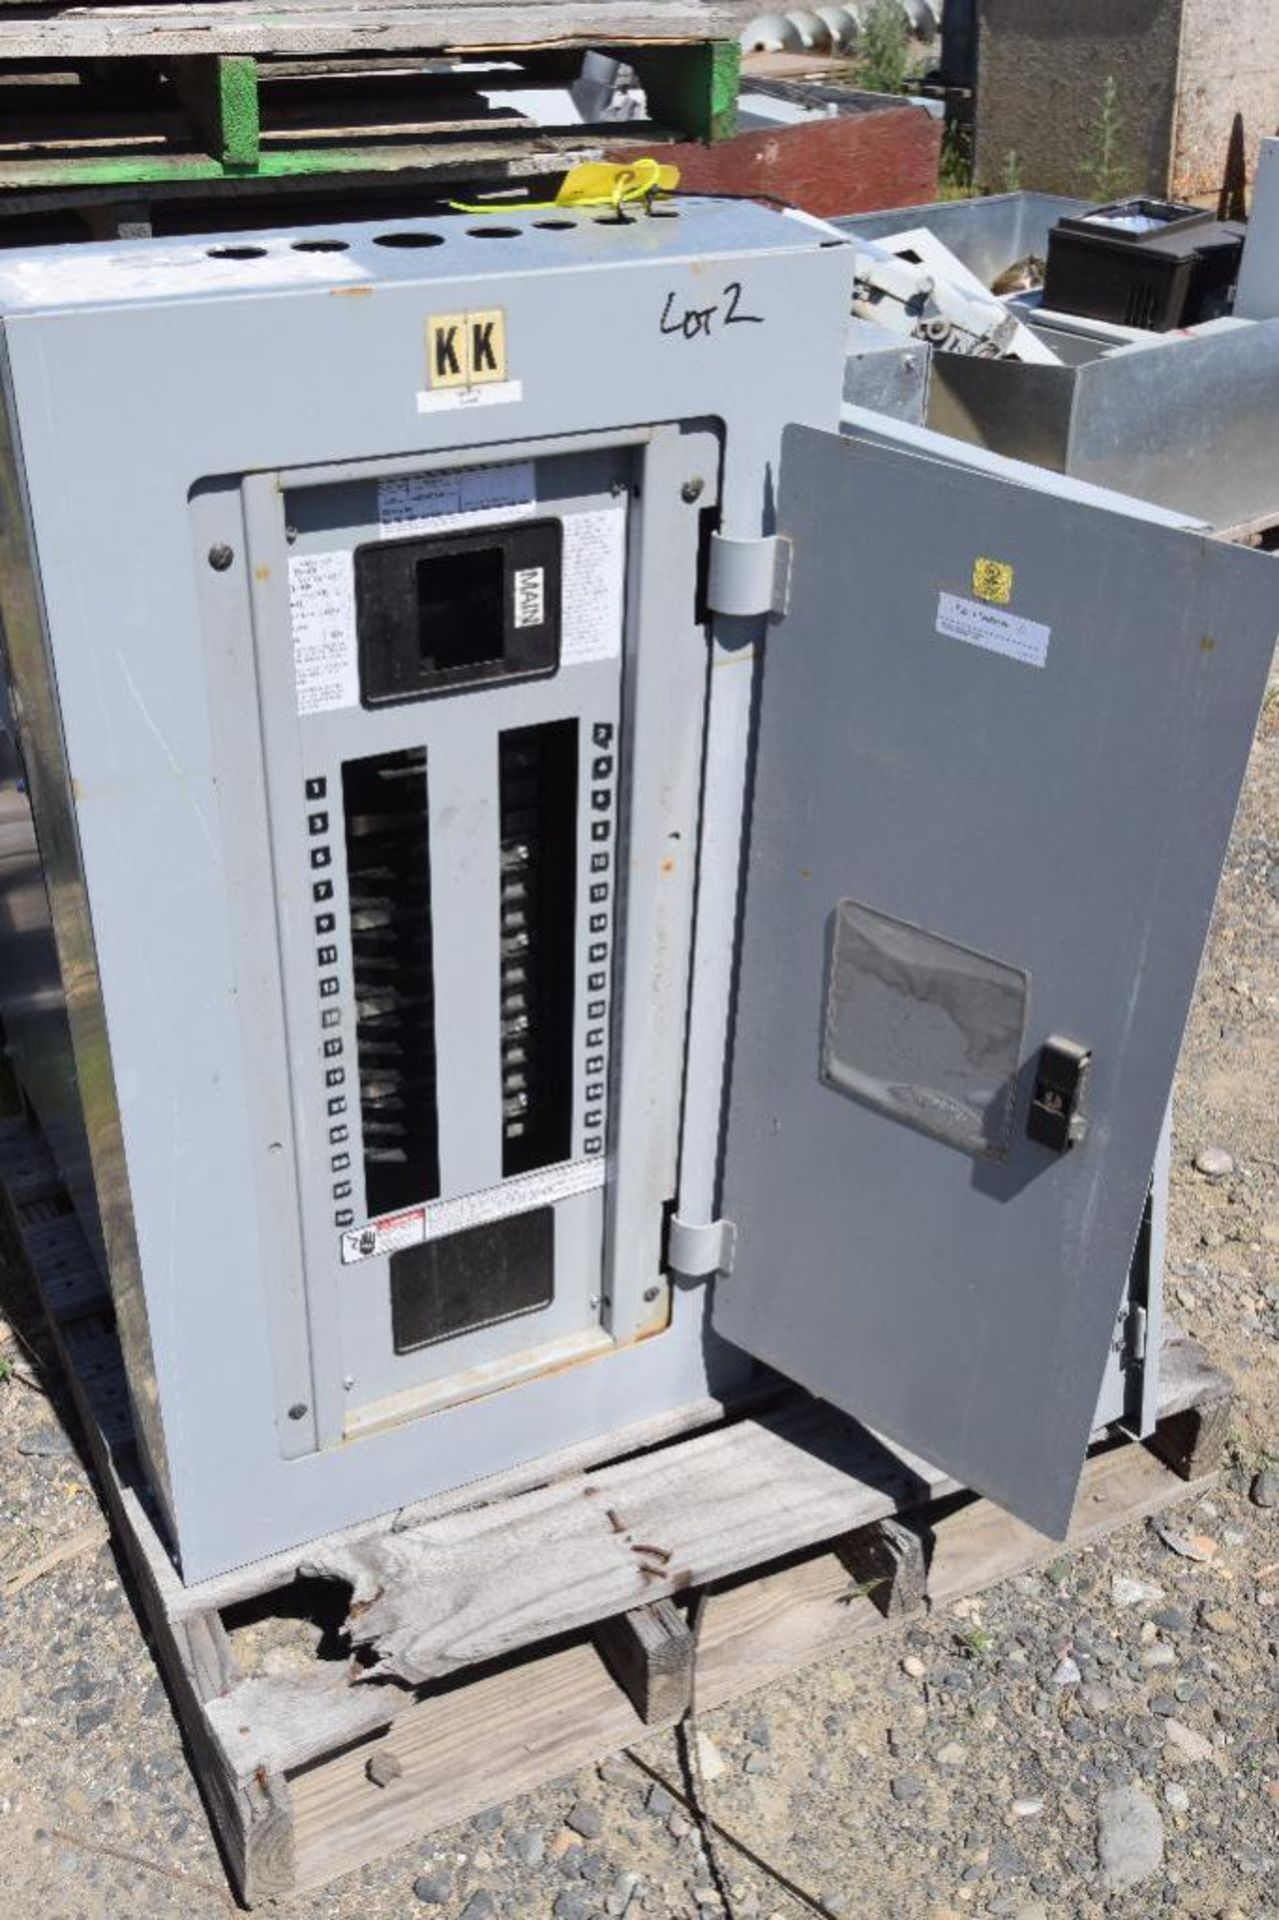 LOT: (1) Square D 45 KVA transformer, Catalog# 45T3H, style 33749-17212-082, date code 9902, type SO - Image 8 of 8